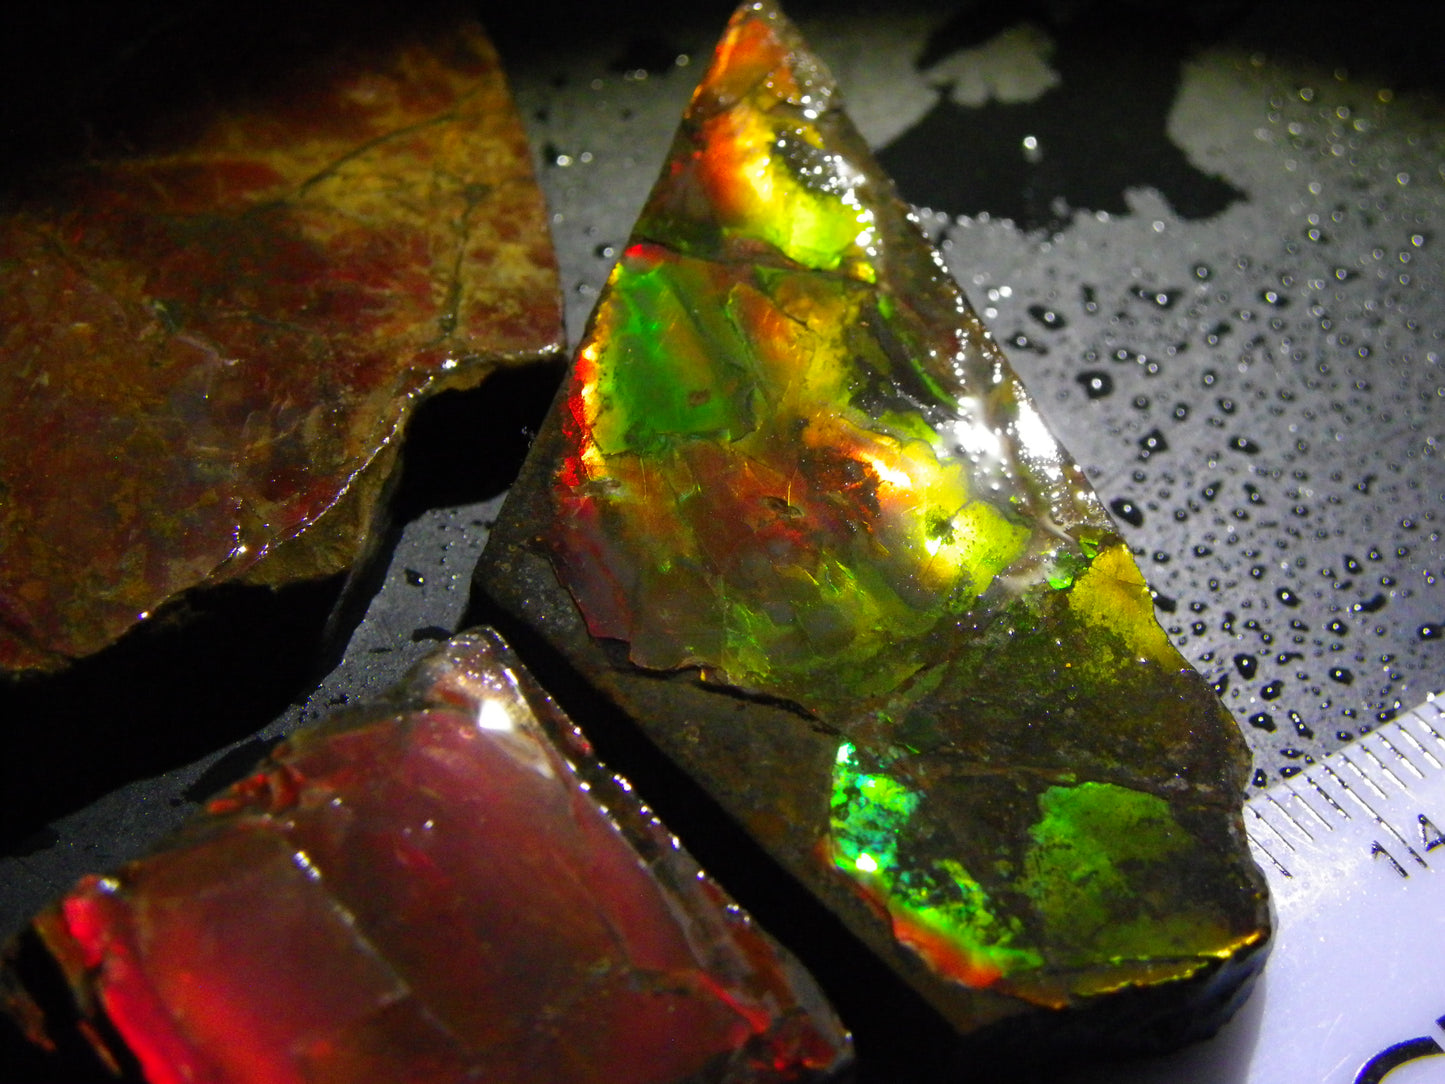 NIce Quality Larger Rough Ammolite Specimens 343cts Red/Gold/Greens Canada